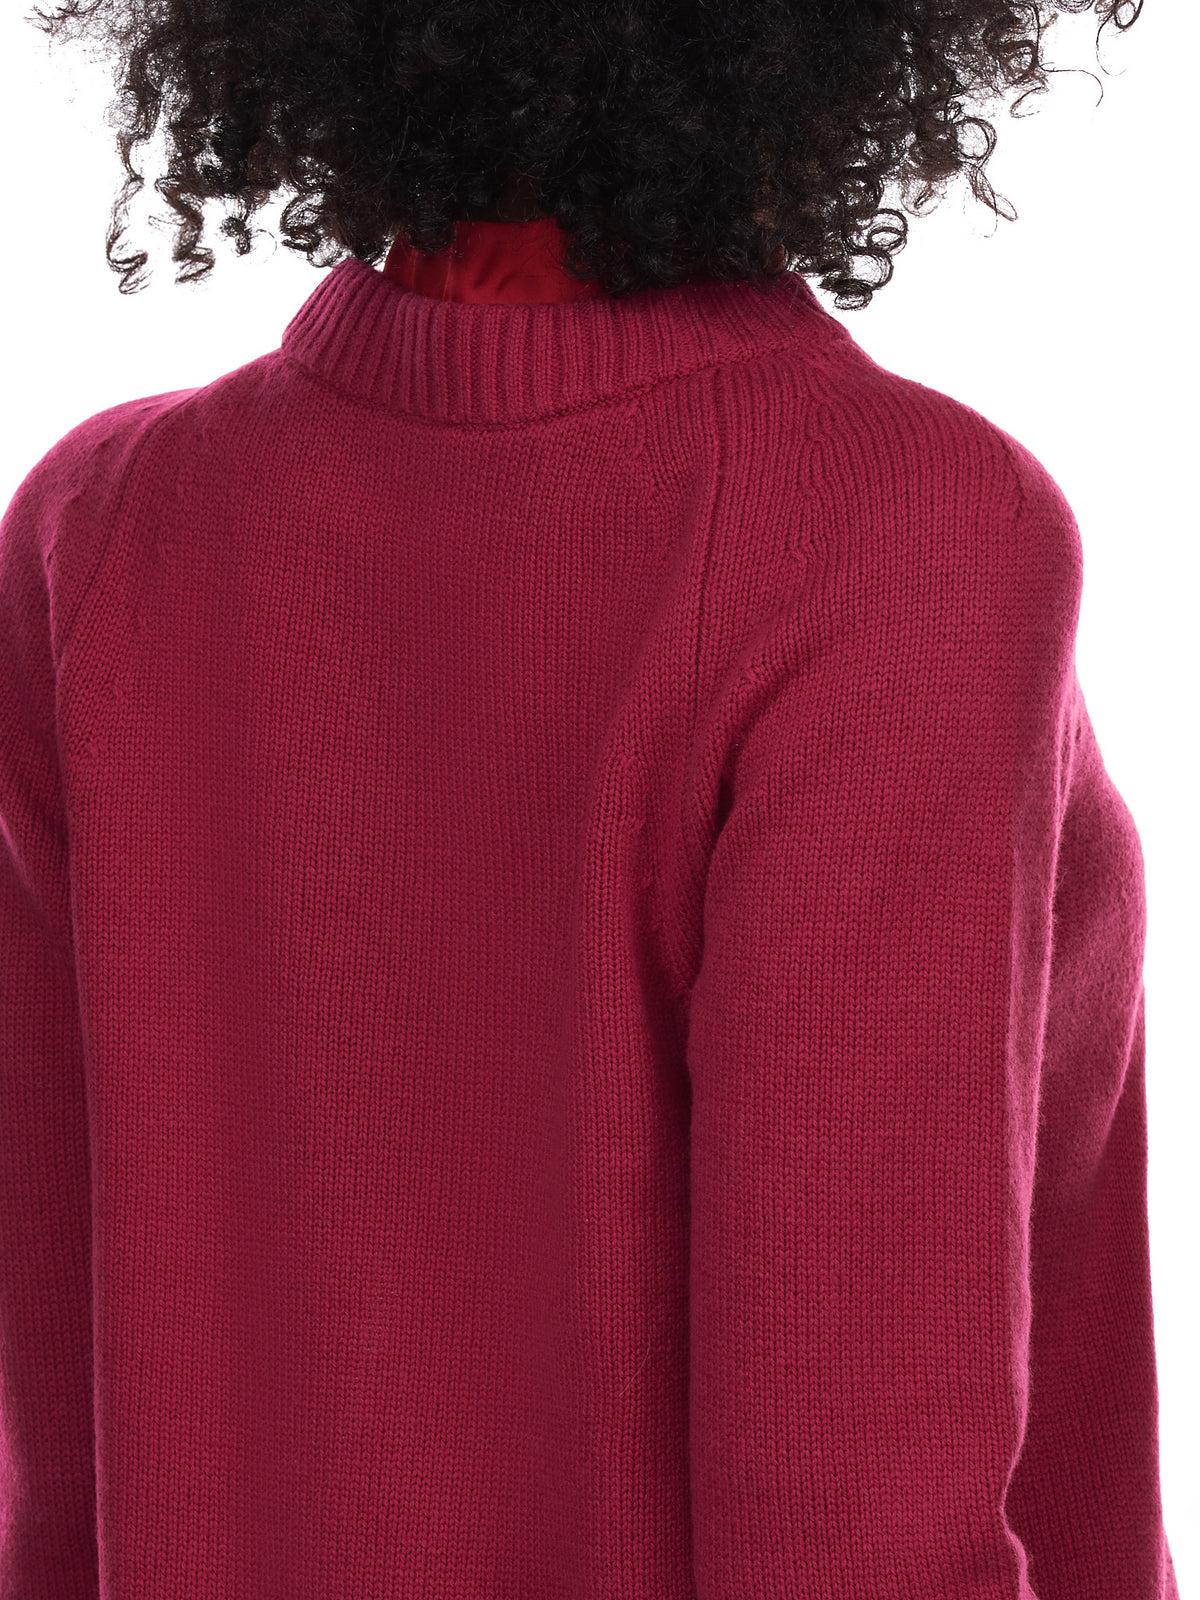 Wool Knit X Satin Sweater (21-05831-PINK-RED)